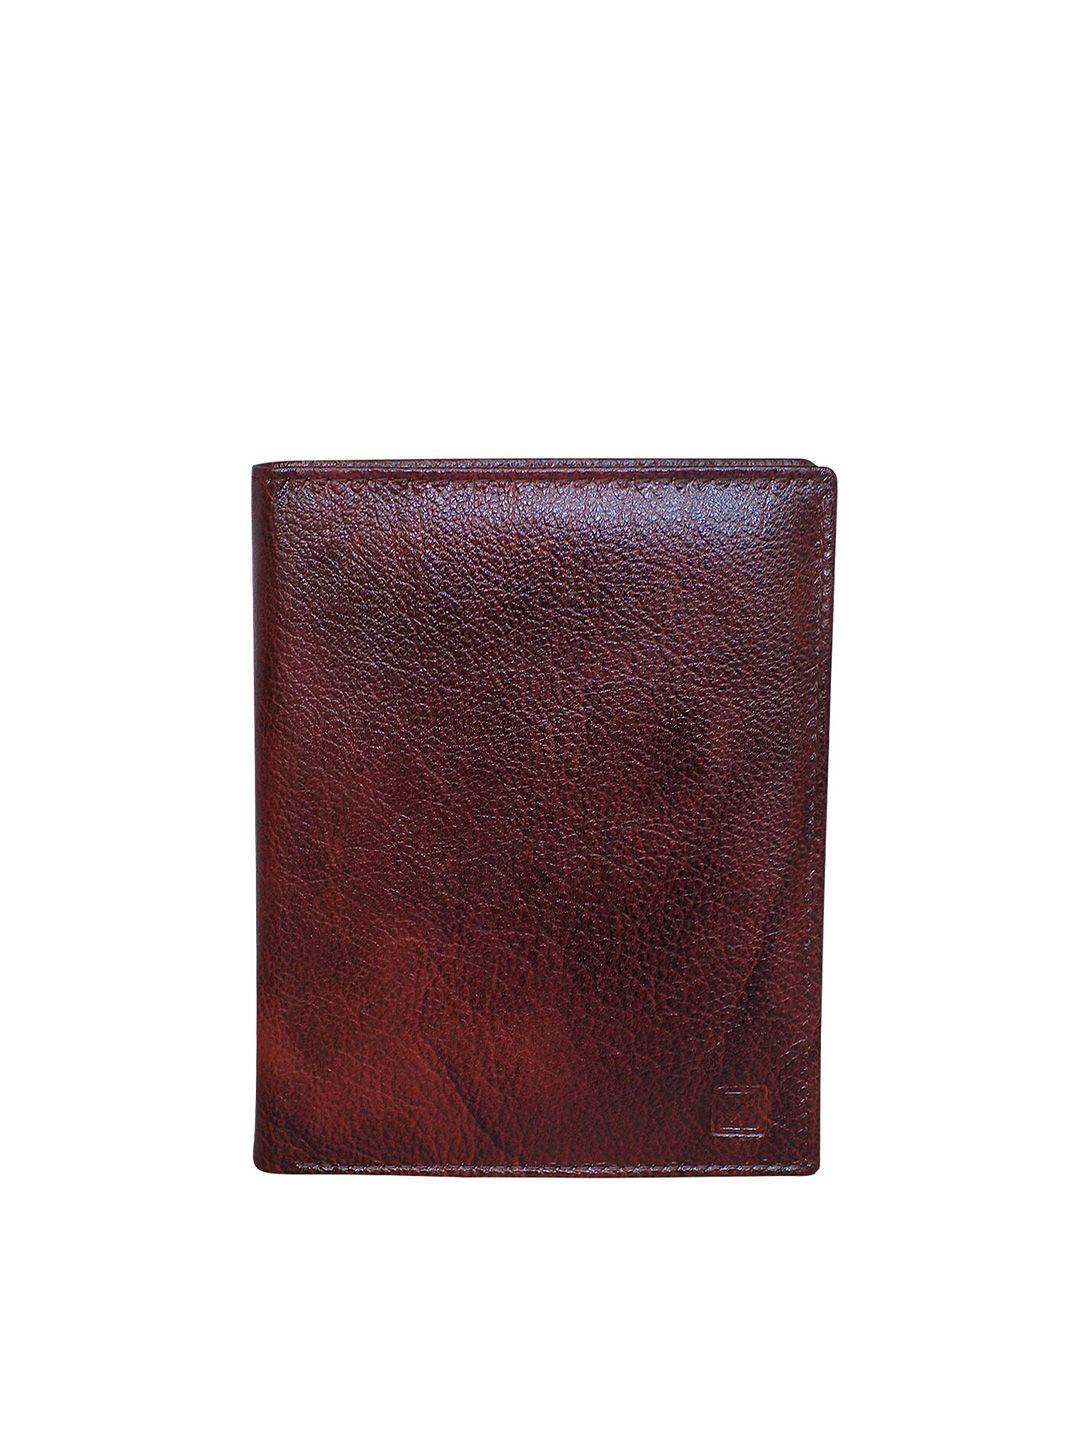 style shoes unisex brown leather passport holder